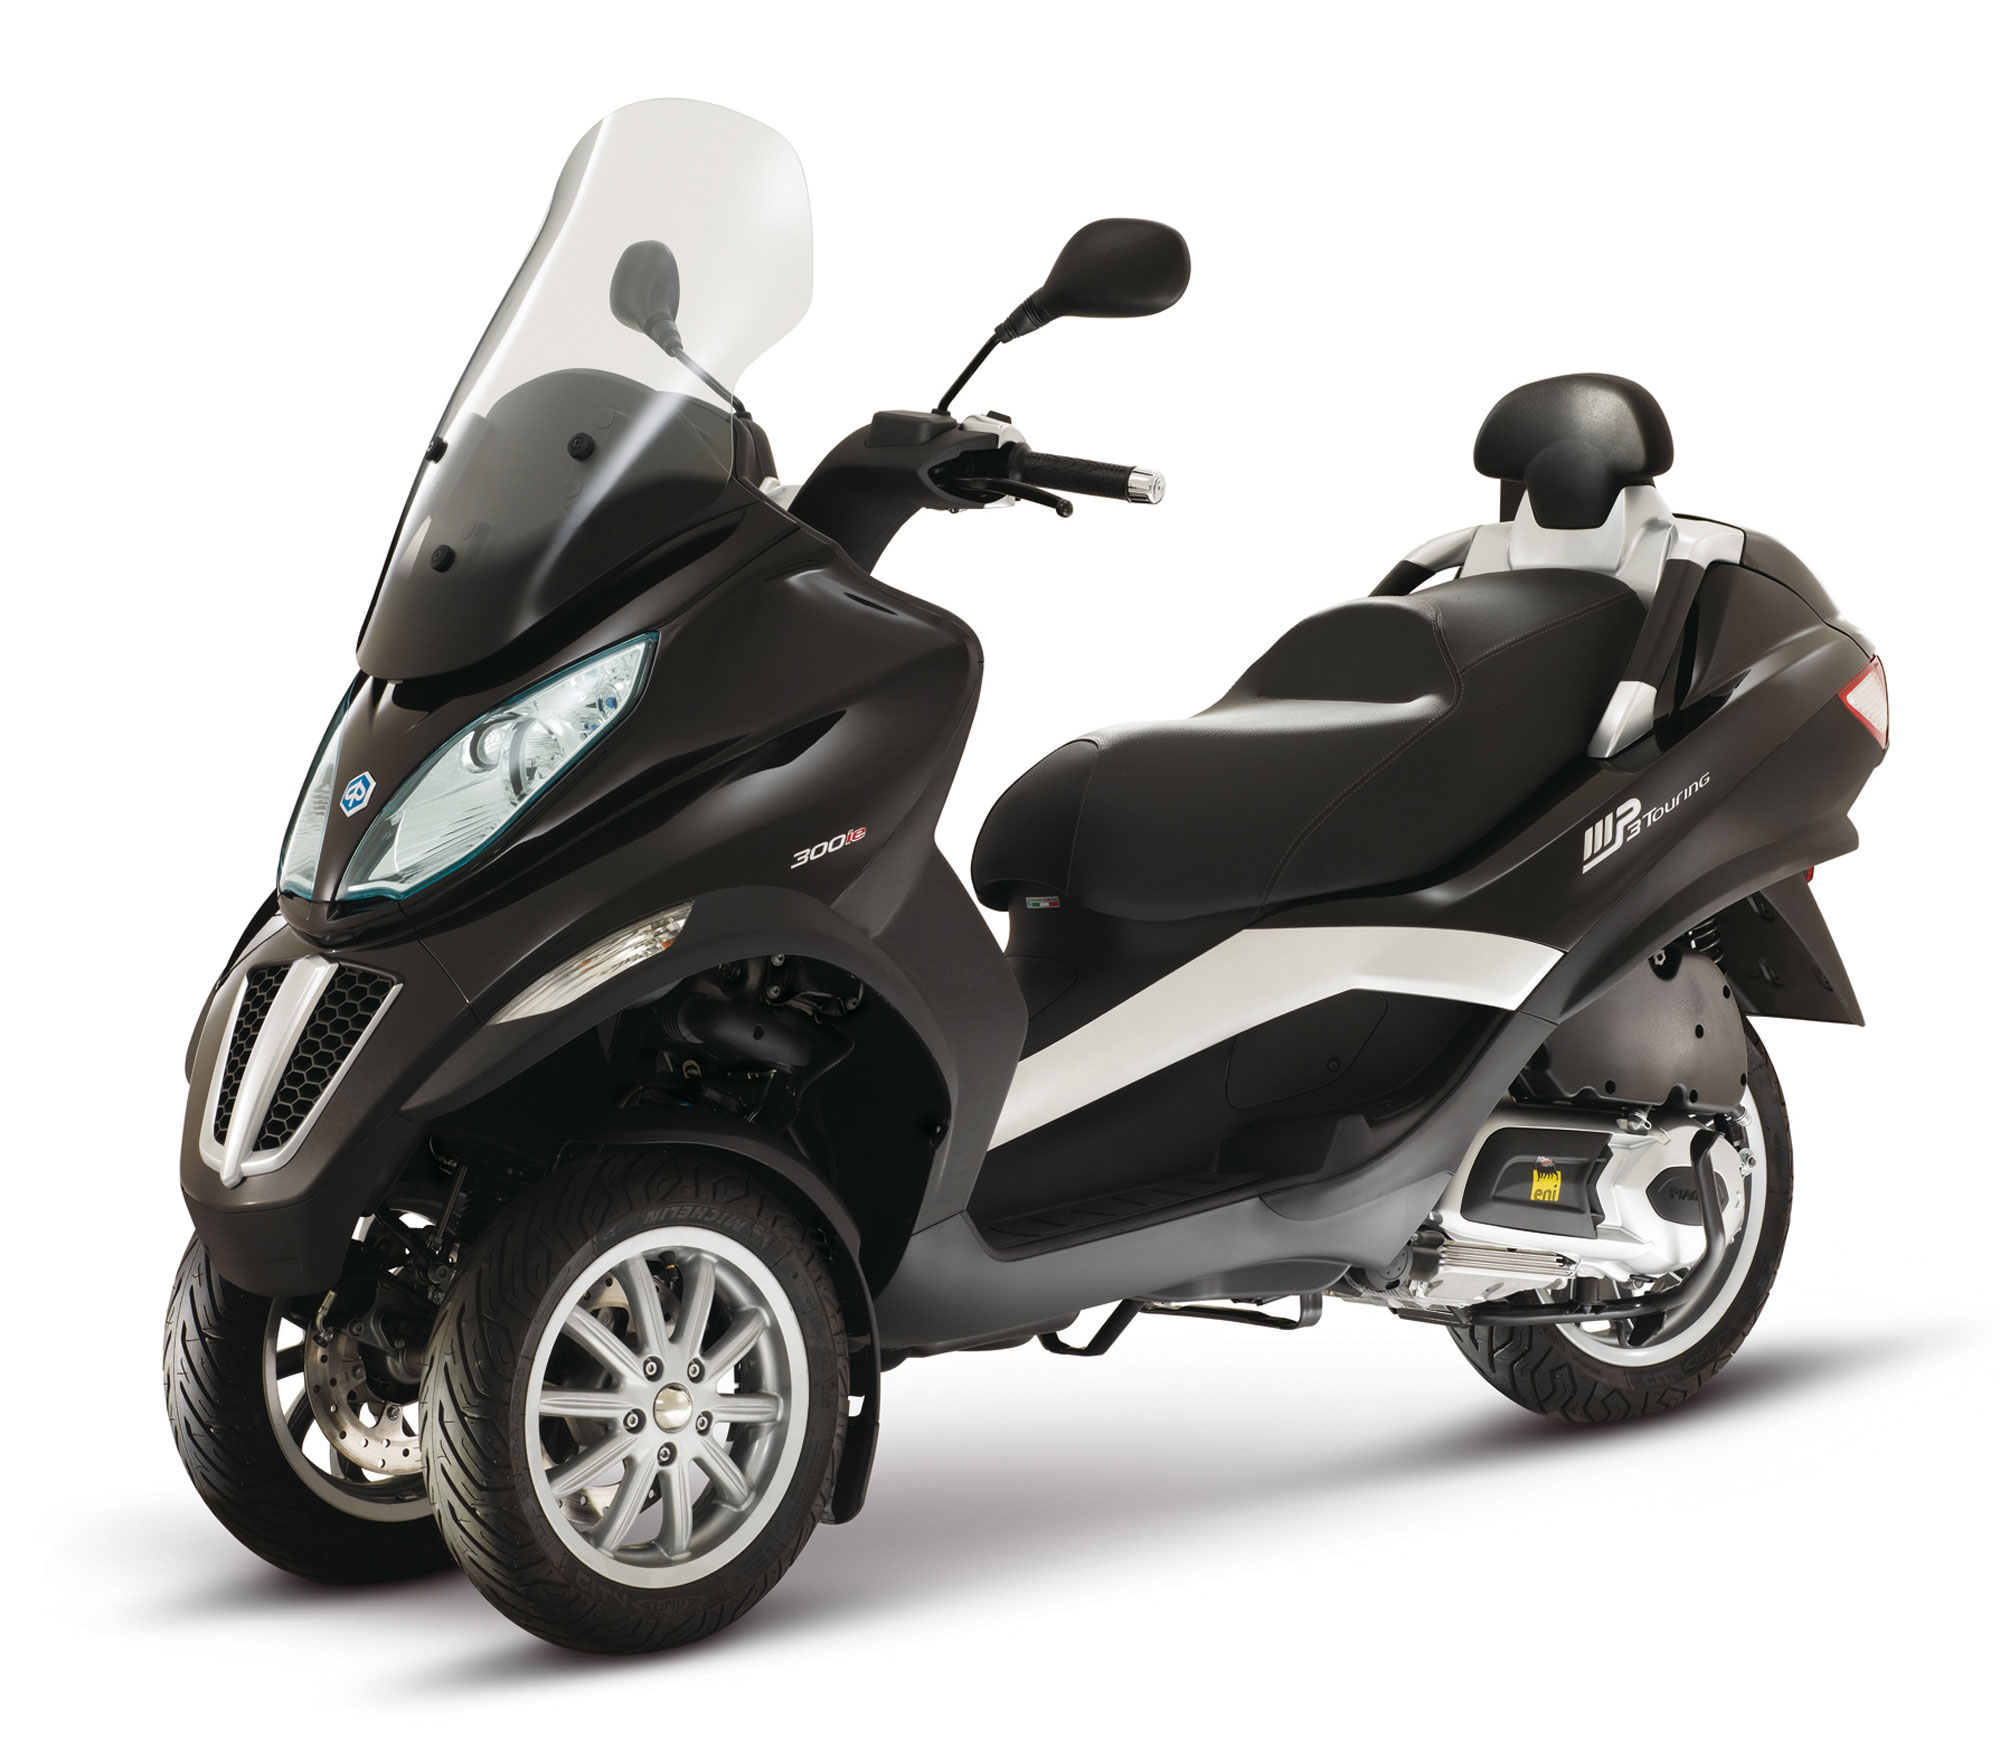 Piaggio MP3 Hybrid scooter imported for R&D purpose